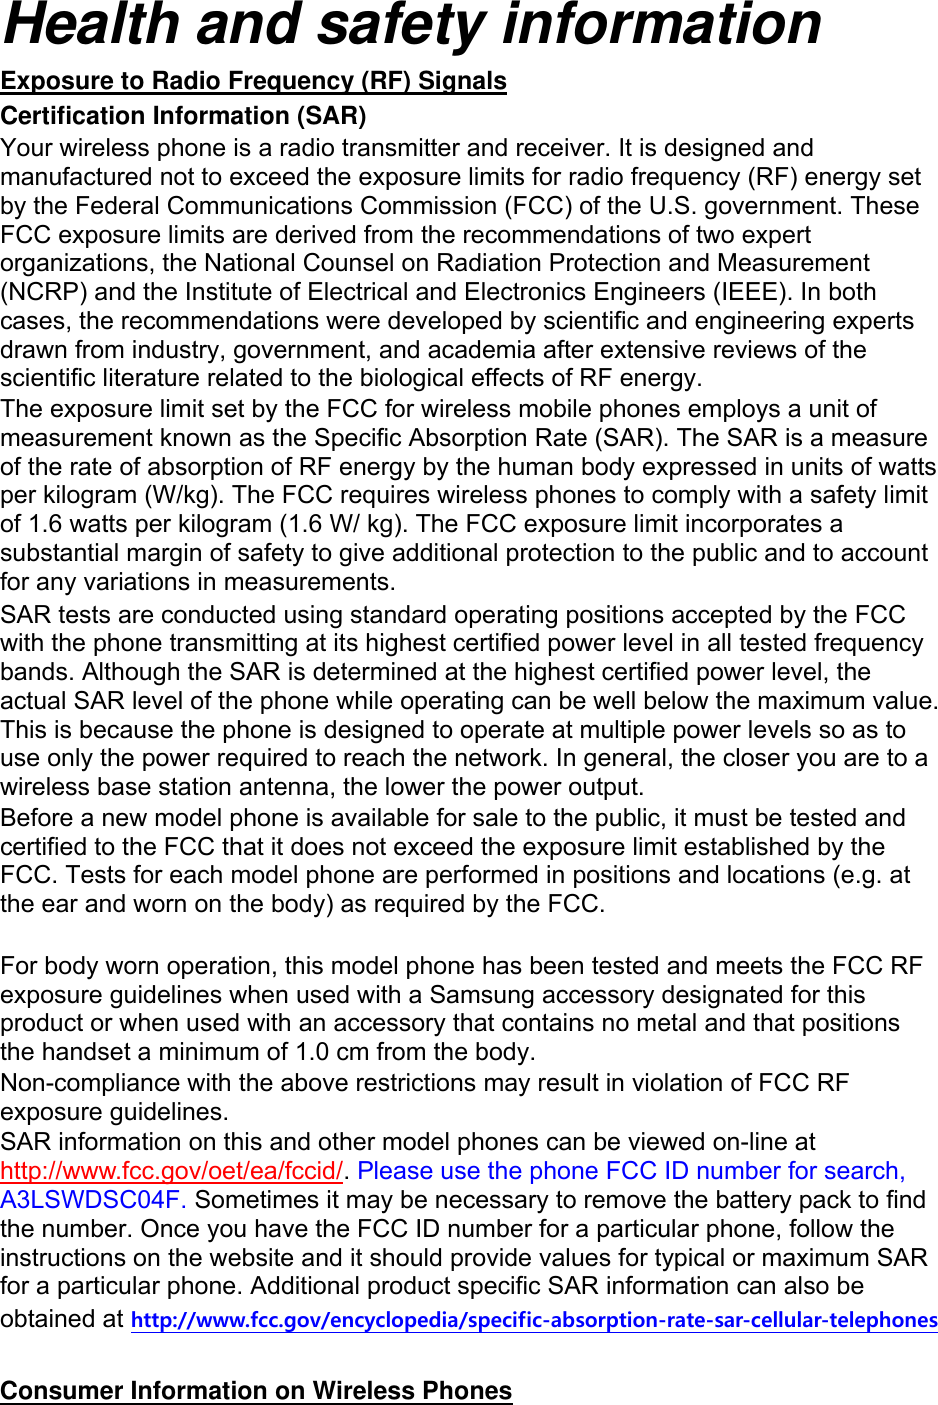 Health and safety information Exposure to Radio Frequency (RF) Signals Certification Information (SAR) Your wireless phone is a radio transmitter and receiver. It is designed and manufactured not to exceed the exposure limits for radio frequency (RF) energy set by the Federal Communications Commission (FCC) of the U.S. government. These FCC exposure limits are derived from the recommendations of two expert organizations, the National Counsel on Radiation Protection and Measurement (NCRP) and the Institute of Electrical and Electronics Engineers (IEEE). In both cases, the recommendations were developed by scientific and engineering experts drawn from industry, government, and academia after extensive reviews of the scientific literature related to the biological effects of RF energy. The exposure limit set by the FCC for wireless mobile phones employs a unit of measurement known as the Specific Absorption Rate (SAR). The SAR is a measure of the rate of absorption of RF energy by the human body expressed in units of watts per kilogram (W/kg). The FCC requires wireless phones to comply with a safety limit of 1.6 watts per kilogram (1.6 W/ kg). The FCC exposure limit incorporates a substantial margin of safety to give additional protection to the public and to account for any variations in measurements. SAR tests are conducted using standard operating positions accepted by the FCC with the phone transmitting at its highest certified power level in all tested frequency bands. Although the SAR is determined at the highest certified power level, the actual SAR level of the phone while operating can be well below the maximum value. This is because the phone is designed to operate at multiple power levels so as to use only the power required to reach the network. In general, the closer you are to a wireless base station antenna, the lower the power output. Before a new model phone is available for sale to the public, it must be tested and certified to the FCC that it does not exceed the exposure limit established by the FCC. Tests for each model phone are performed in positions and locations (e.g. at the ear and worn on the body) as required by the FCC.      For body worn operation, this model phone has been tested and meets the FCC RF exposure guidelines when used with a Samsung accessory designated for this product or when used with an accessory that contains no metal and that positions the handset a minimum of 1.0 cm from the body.   Non-compliance with the above restrictions may result in violation of FCC RF exposure guidelines. SAR information on this and other model phones can be viewed on-line at http://www.fcc.gov/oet/ea/fccid/. Please use the phone FCC ID number for search, A3LSWDSC04F. Sometimes it may be necessary to remove the battery pack to find the number. Once you have the FCC ID number for a particular phone, follow the instructions on the website and it should provide values for typical or maximum SAR for a particular phone. Additional product specific SAR information can also be obtained at http://www.fcc.gov/encyclopedia/specific-absorption-rate-sar-cellular-telephones  Consumer Information on Wireless Phones 